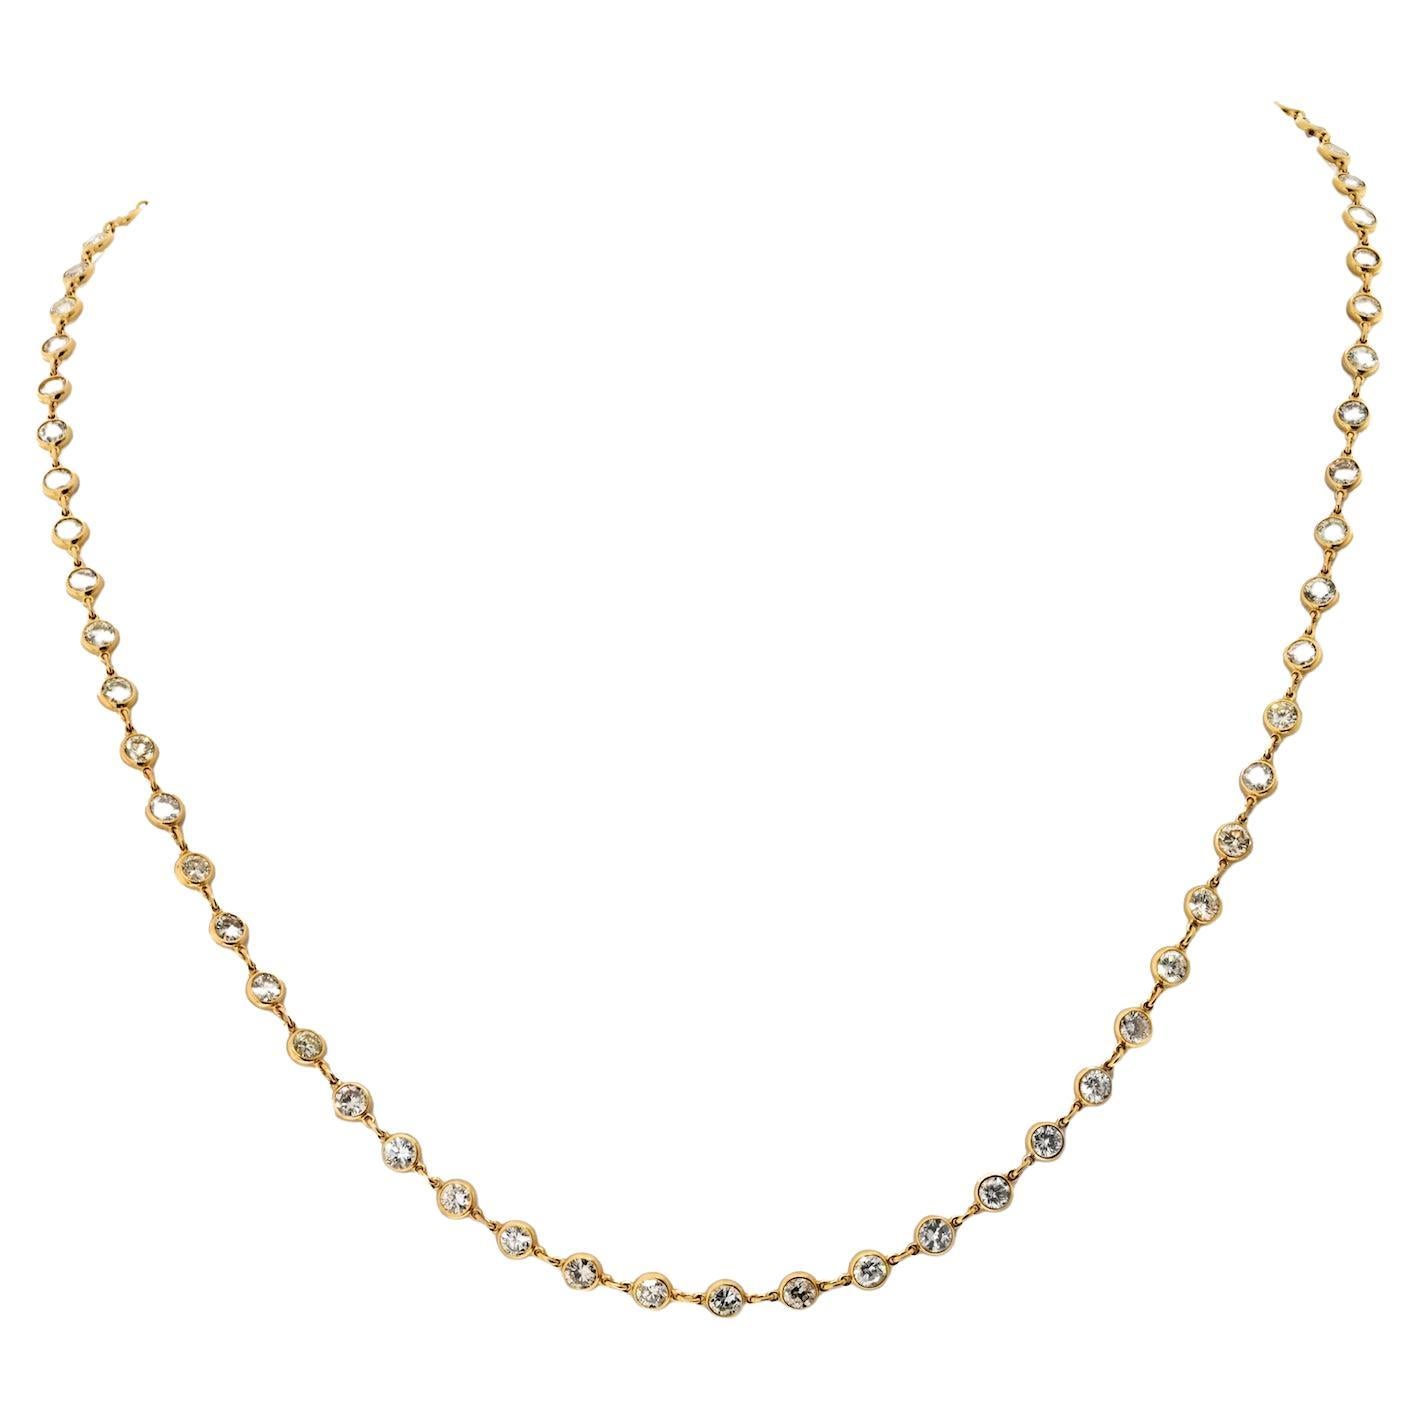 18K Yellow Gold 11.68cttw Diamond By The Yard 16 Inch Chain Necklace For Sale